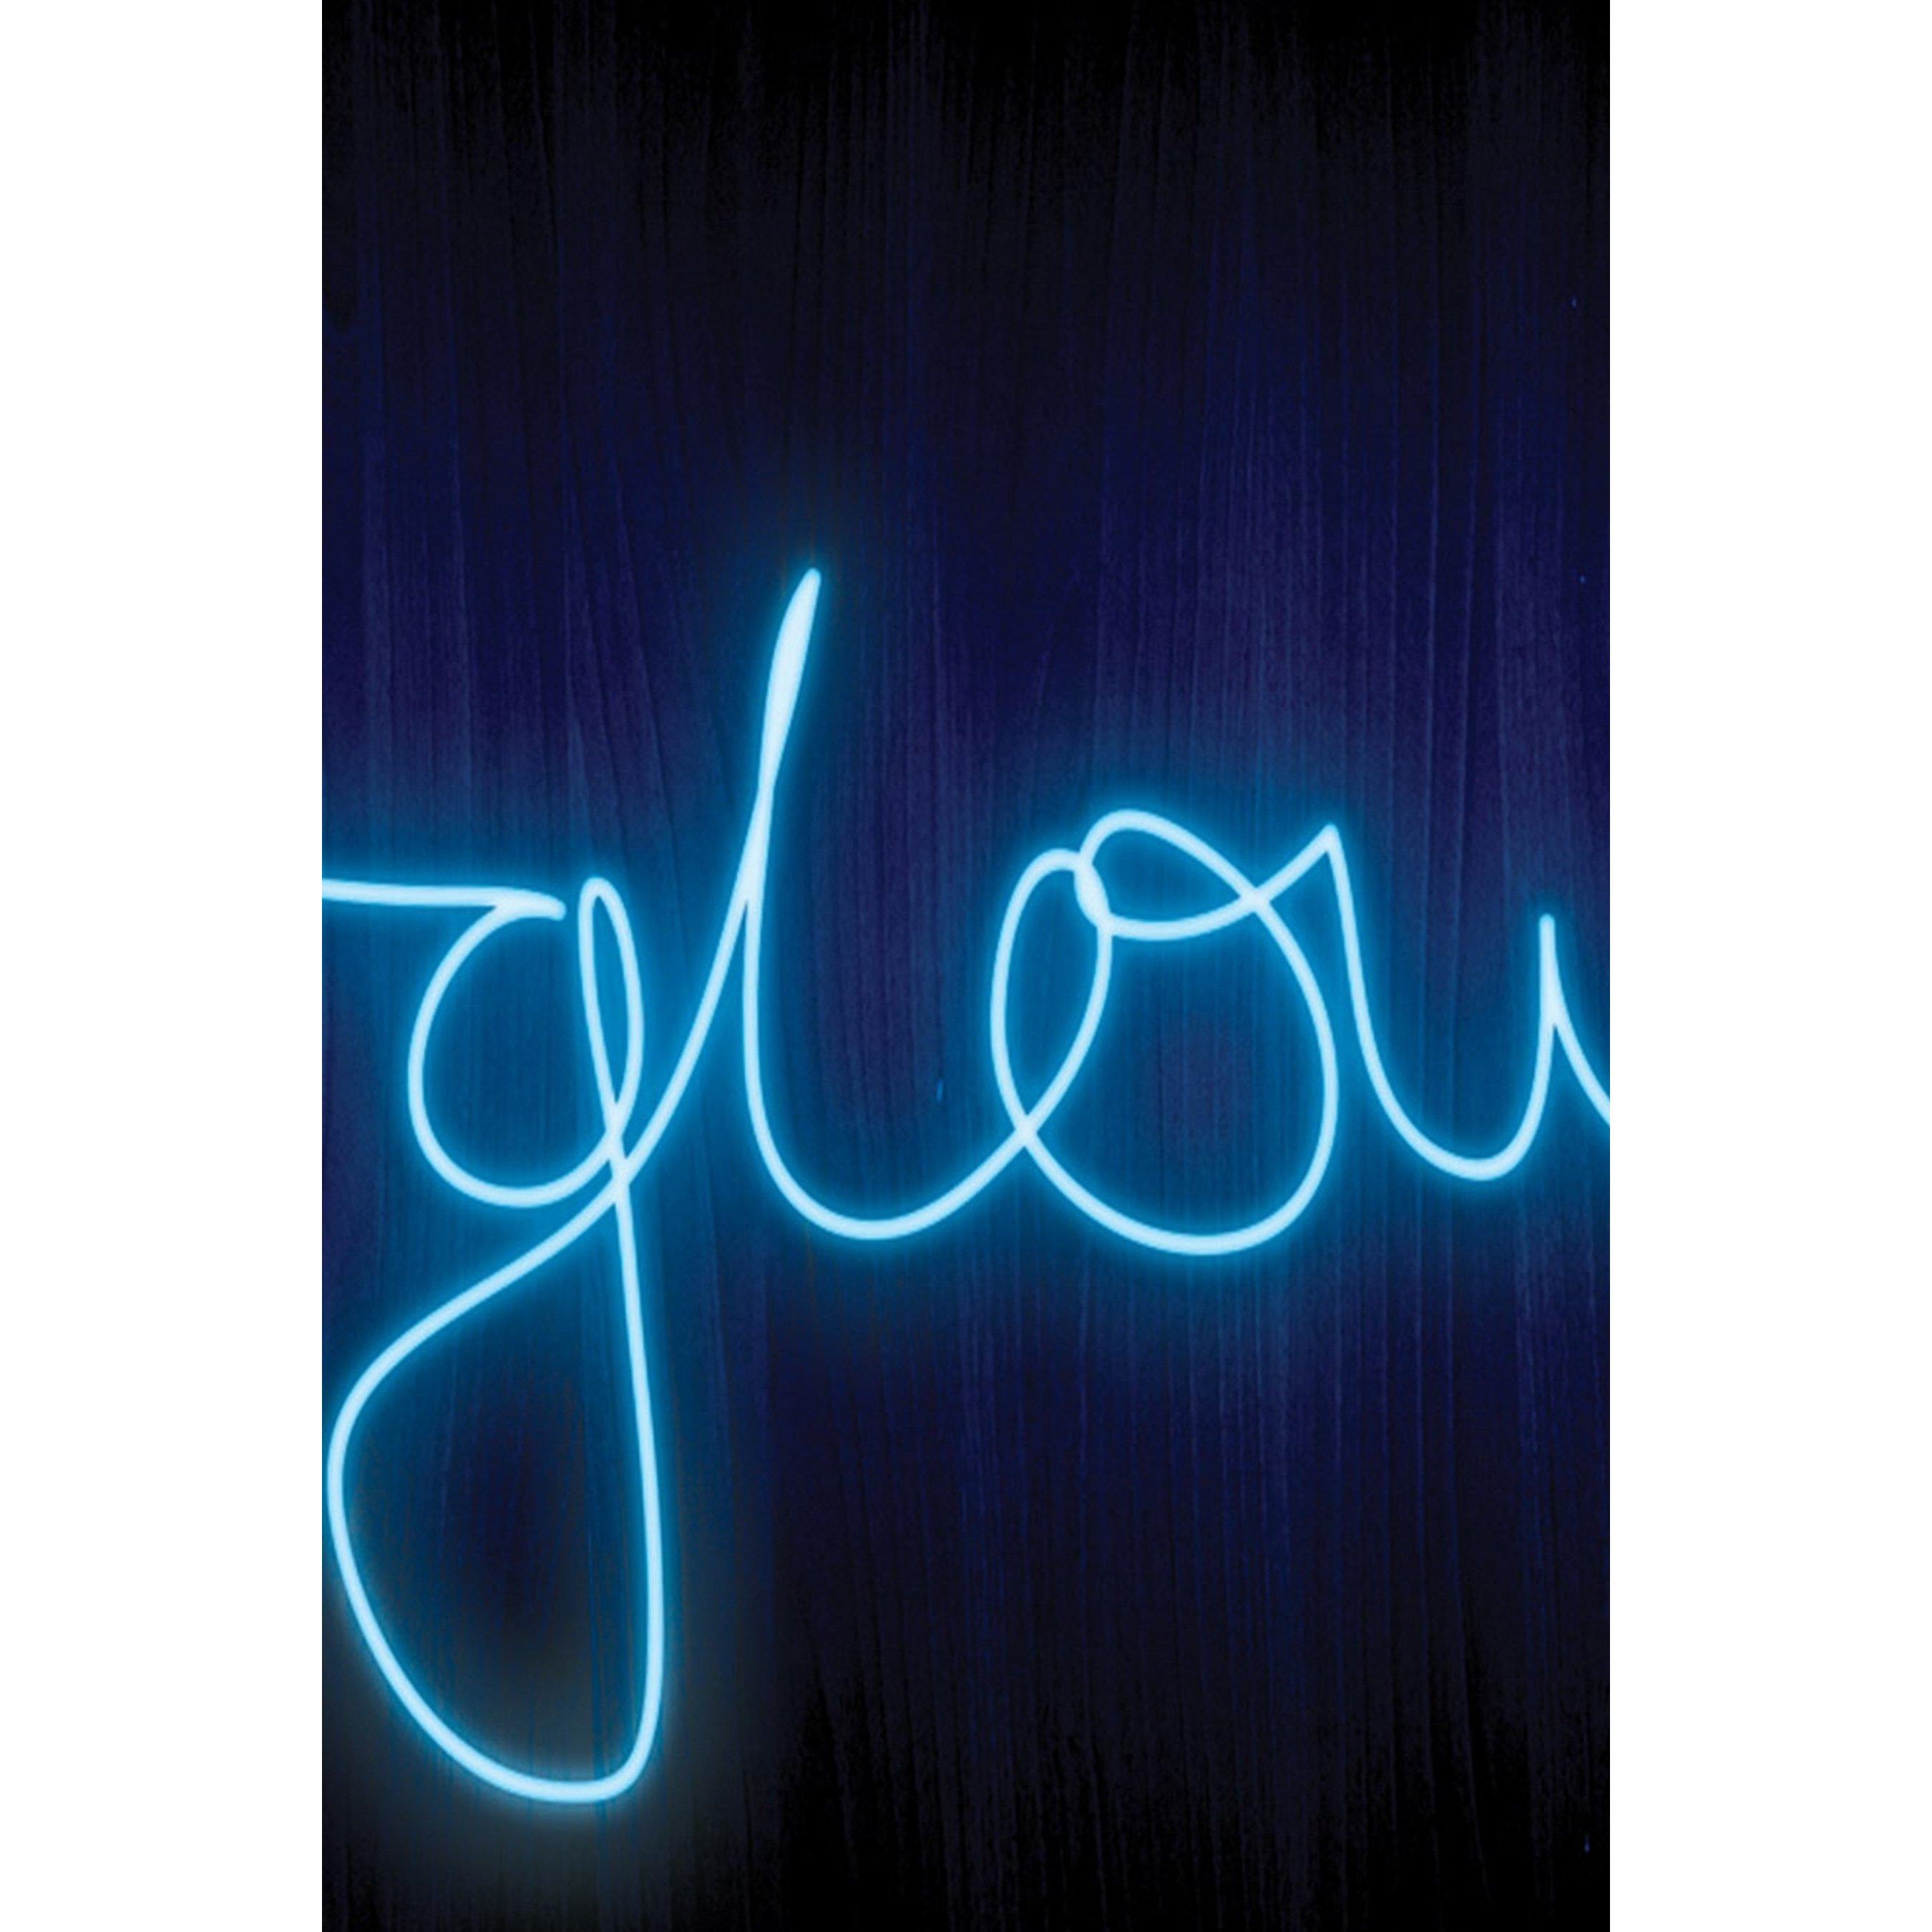 Multifunction Shape Your Own Neon Light - image 1